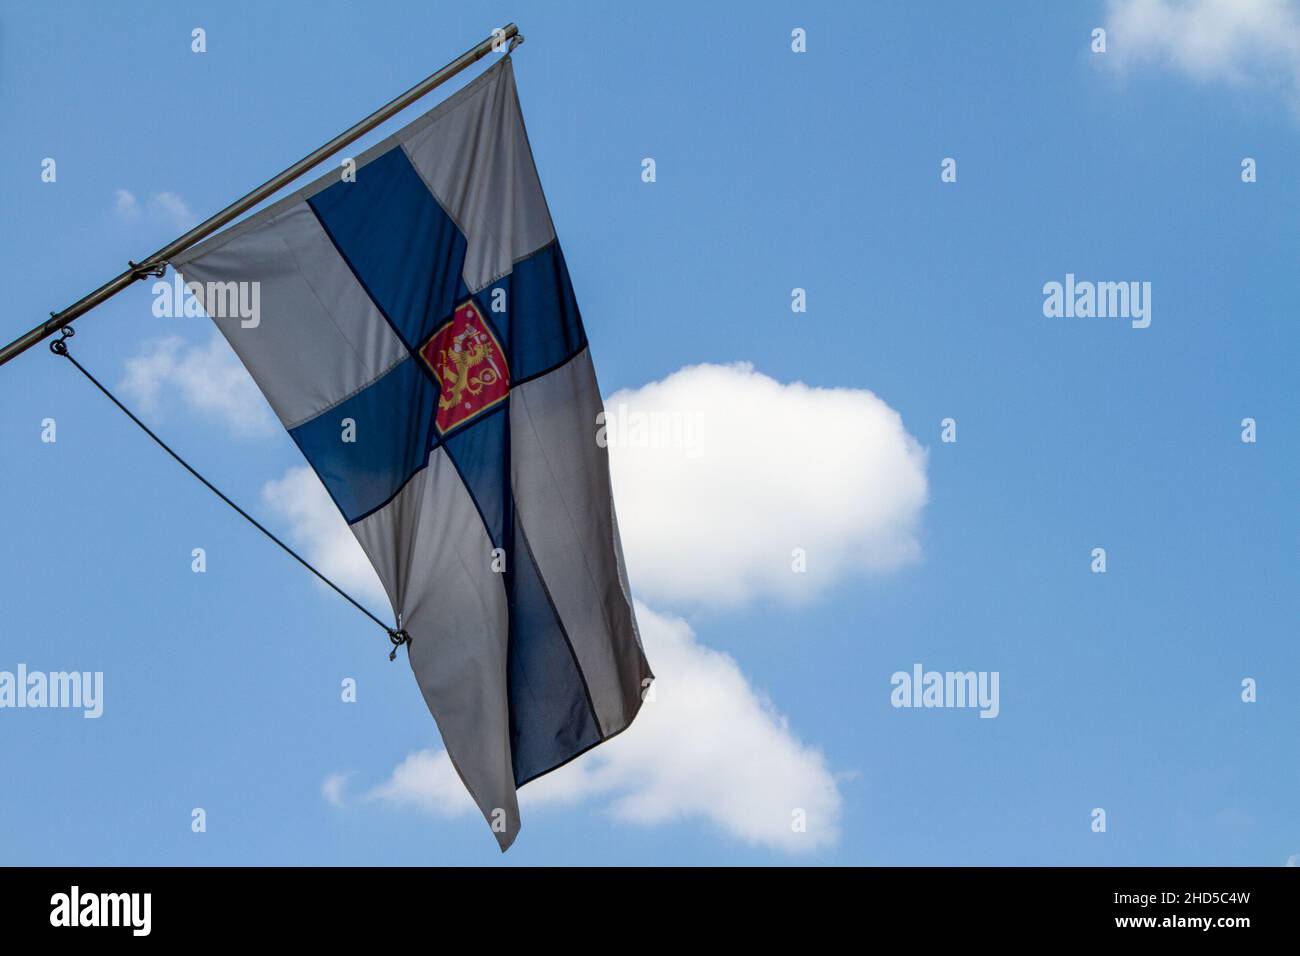 Vienna, Austria, July 24, 2021.The flag of Finland is modeled on the flag of Denmark. It represents the blue Scandinavian cross on a white background. Stock Photo